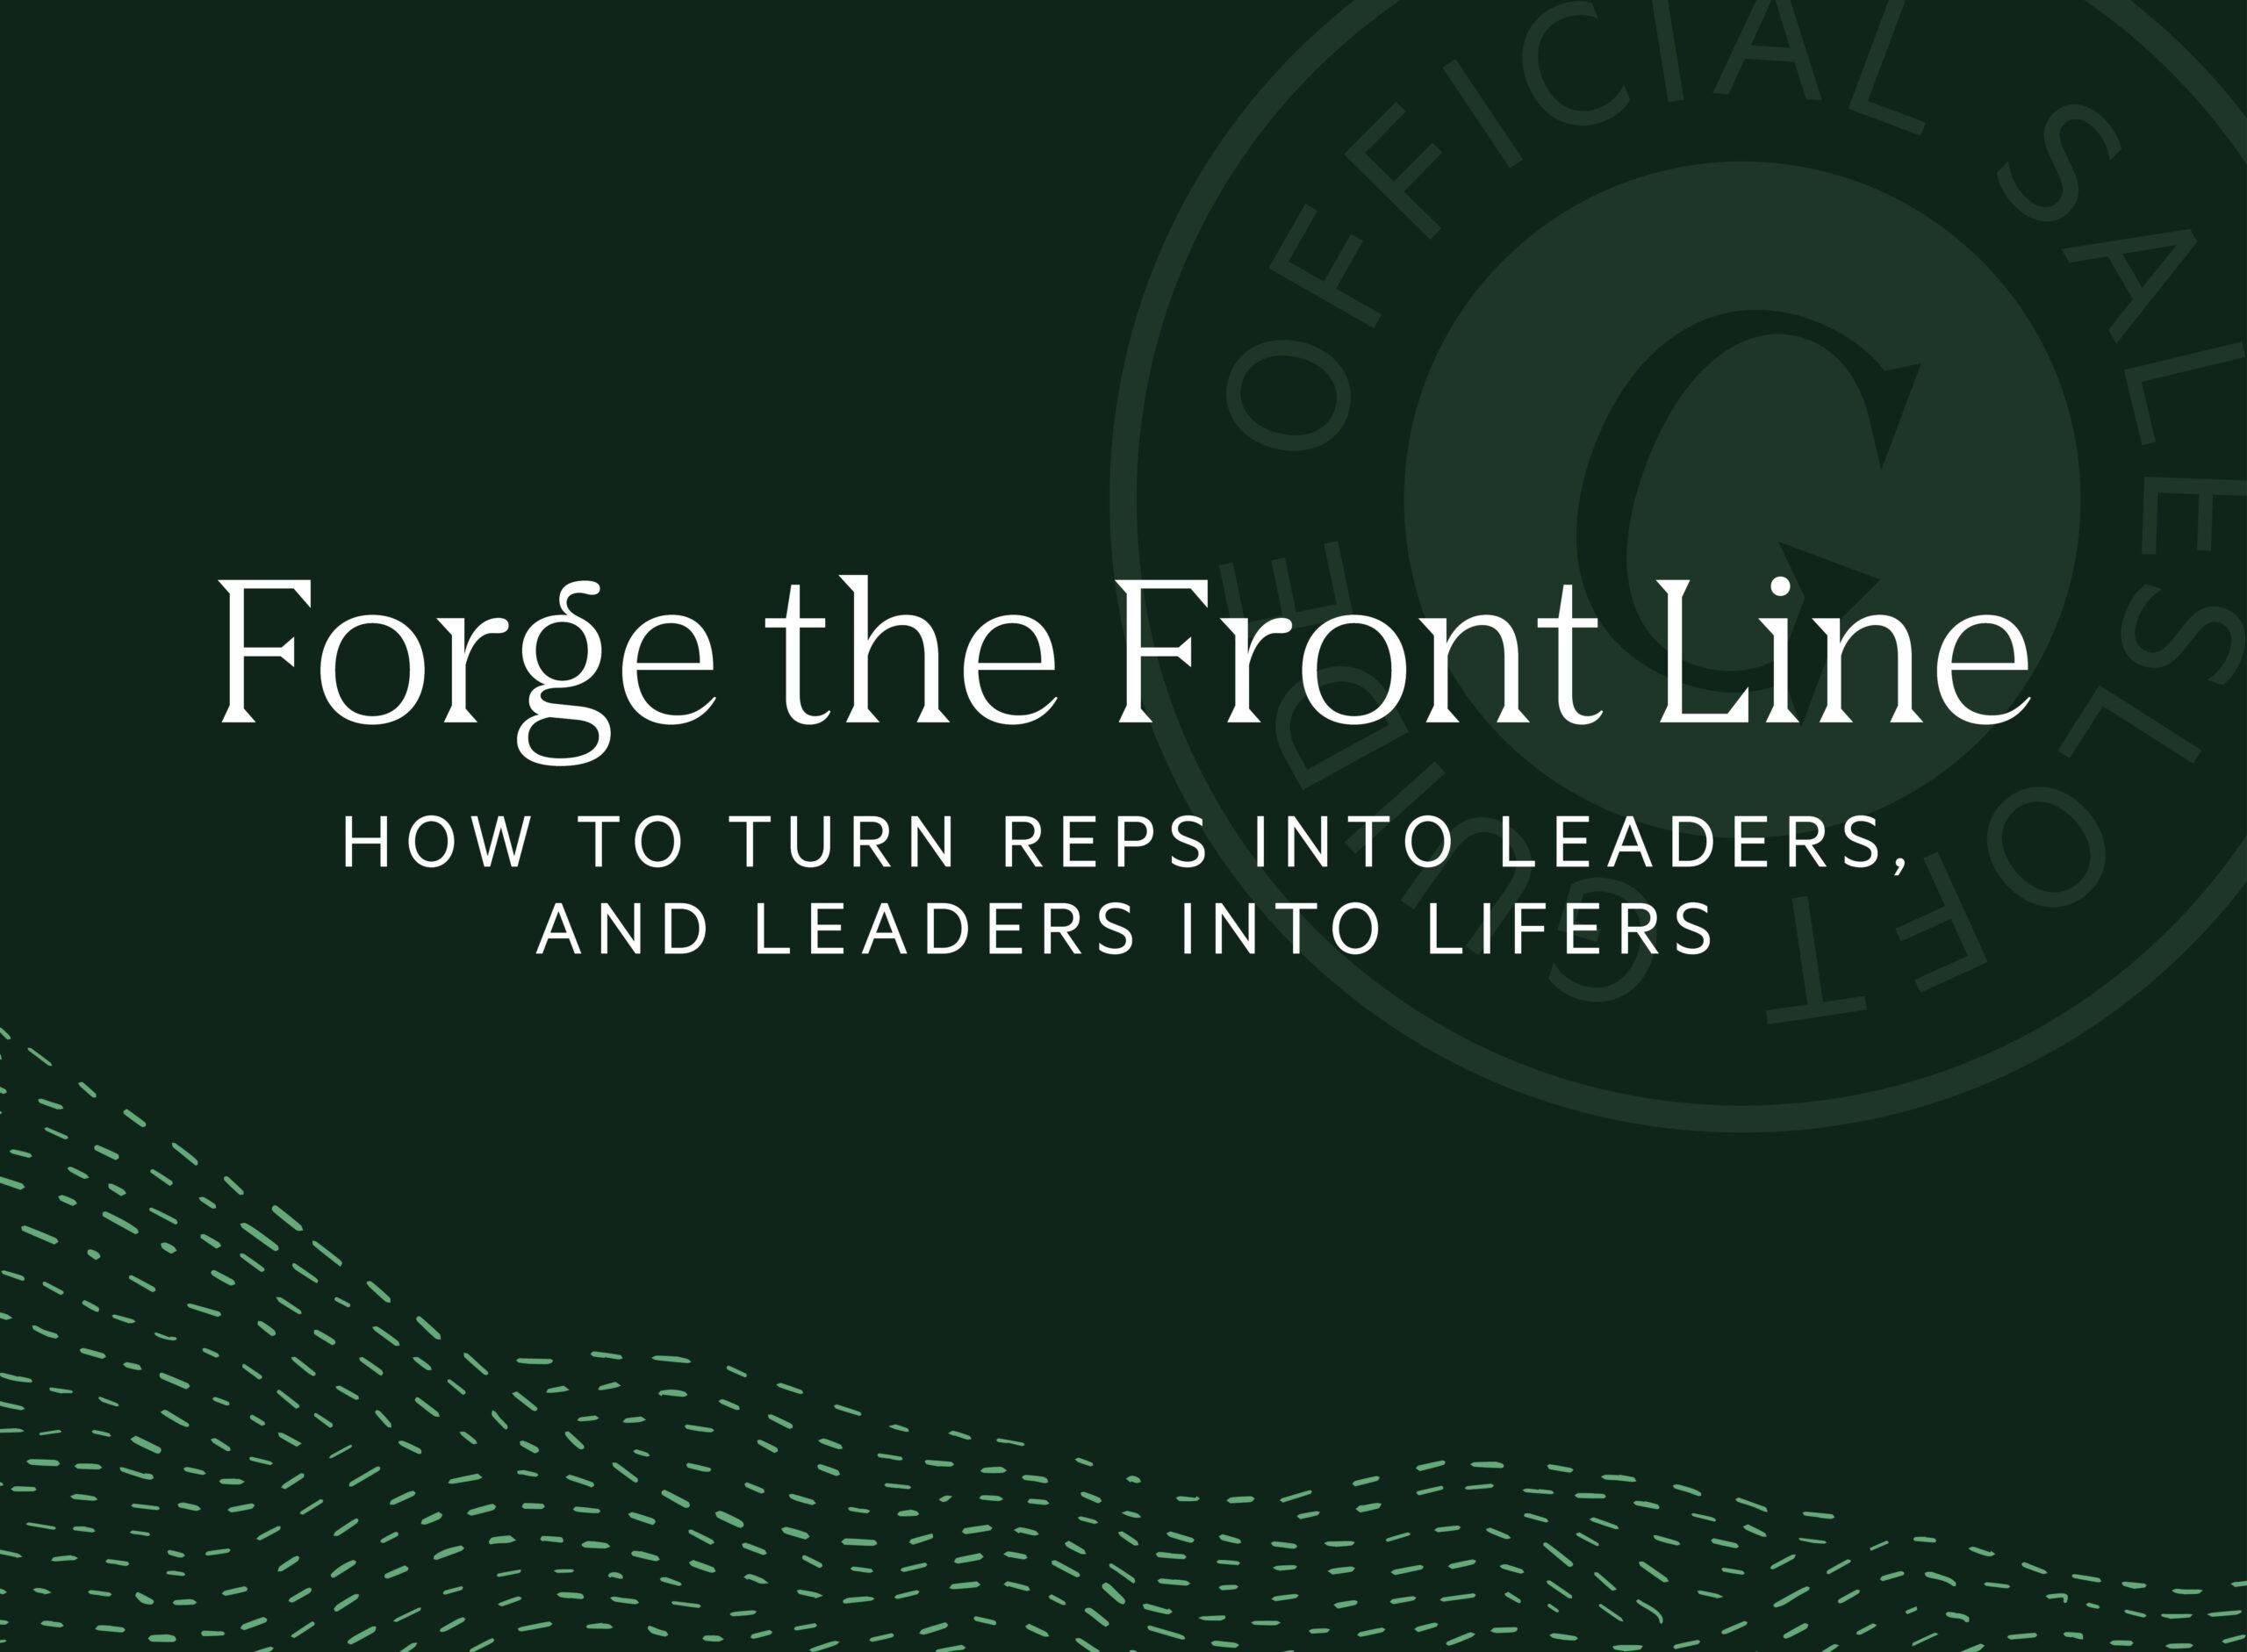 "Turn reps into leaders and leaders into lifers"